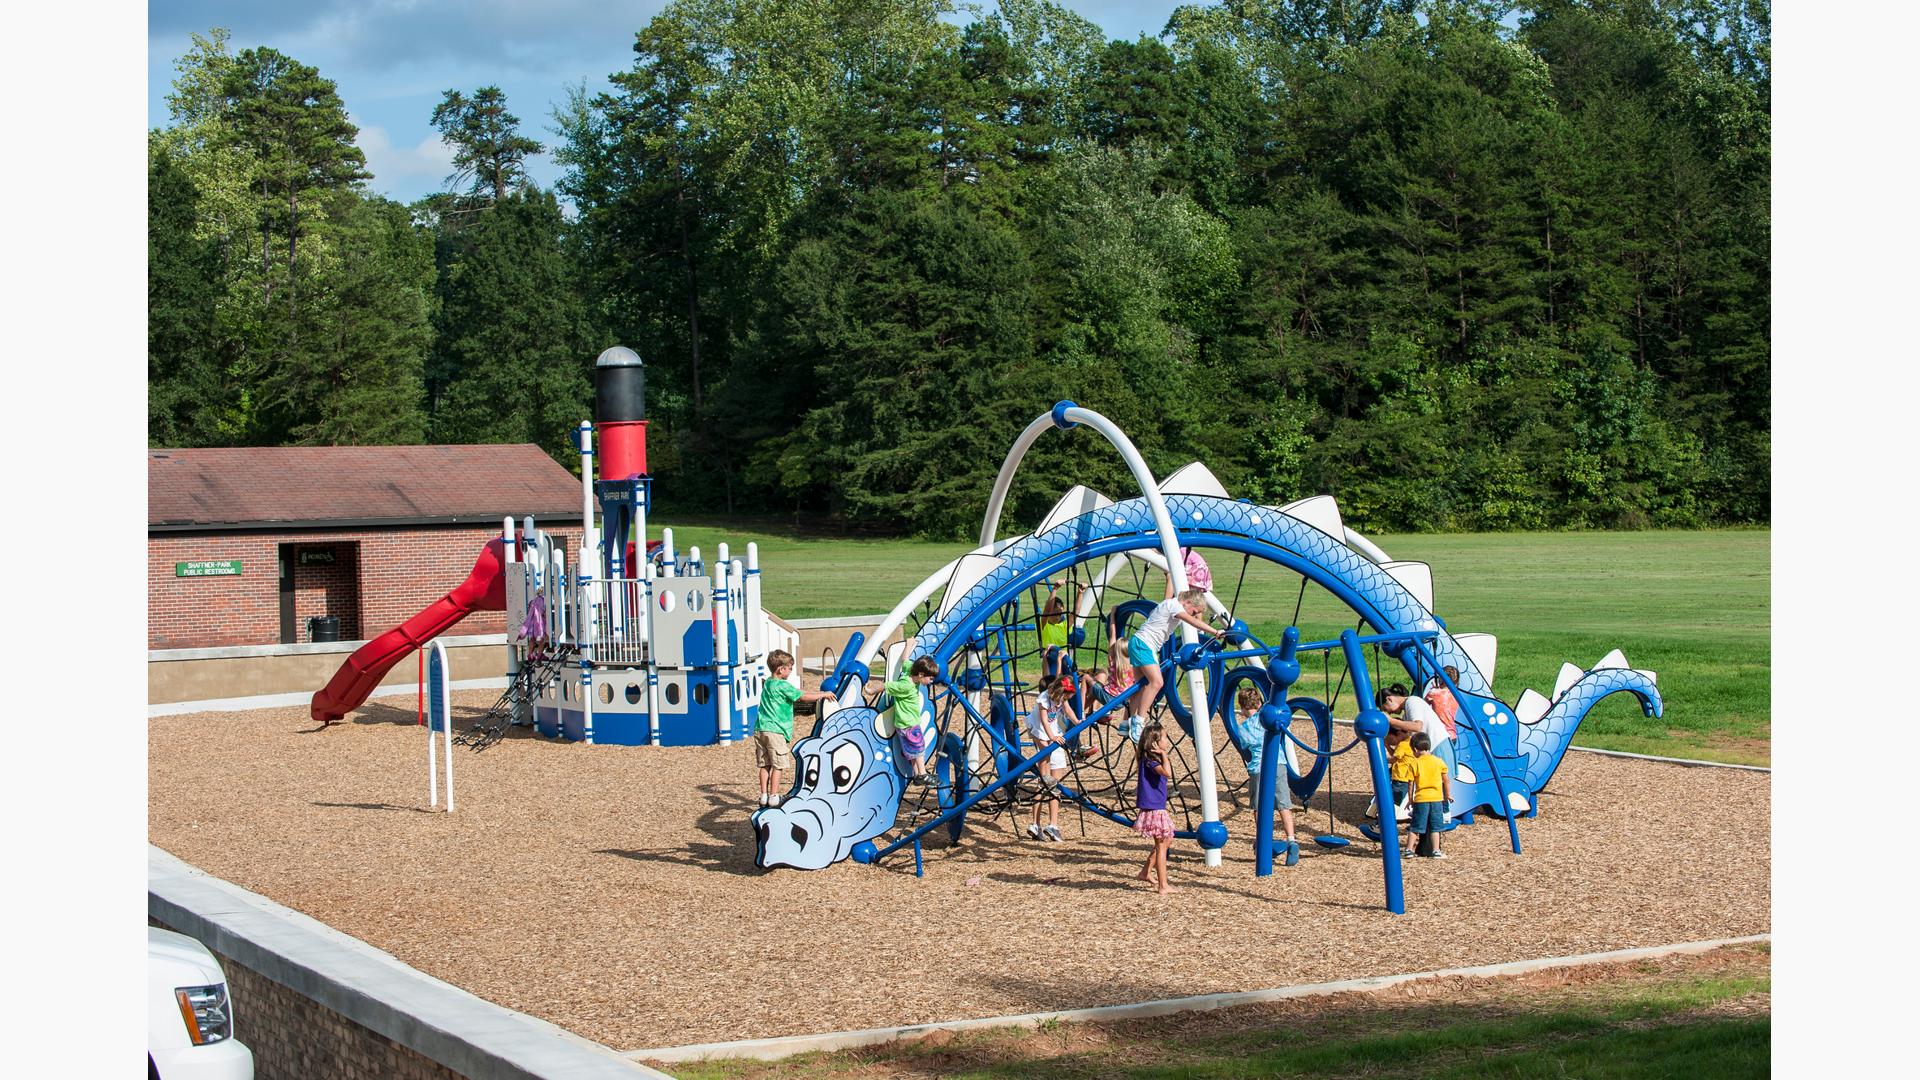 Shaffner Park with custom Evos Dragon and Steamboat play systems. The Dragon play system is crowed with kids.